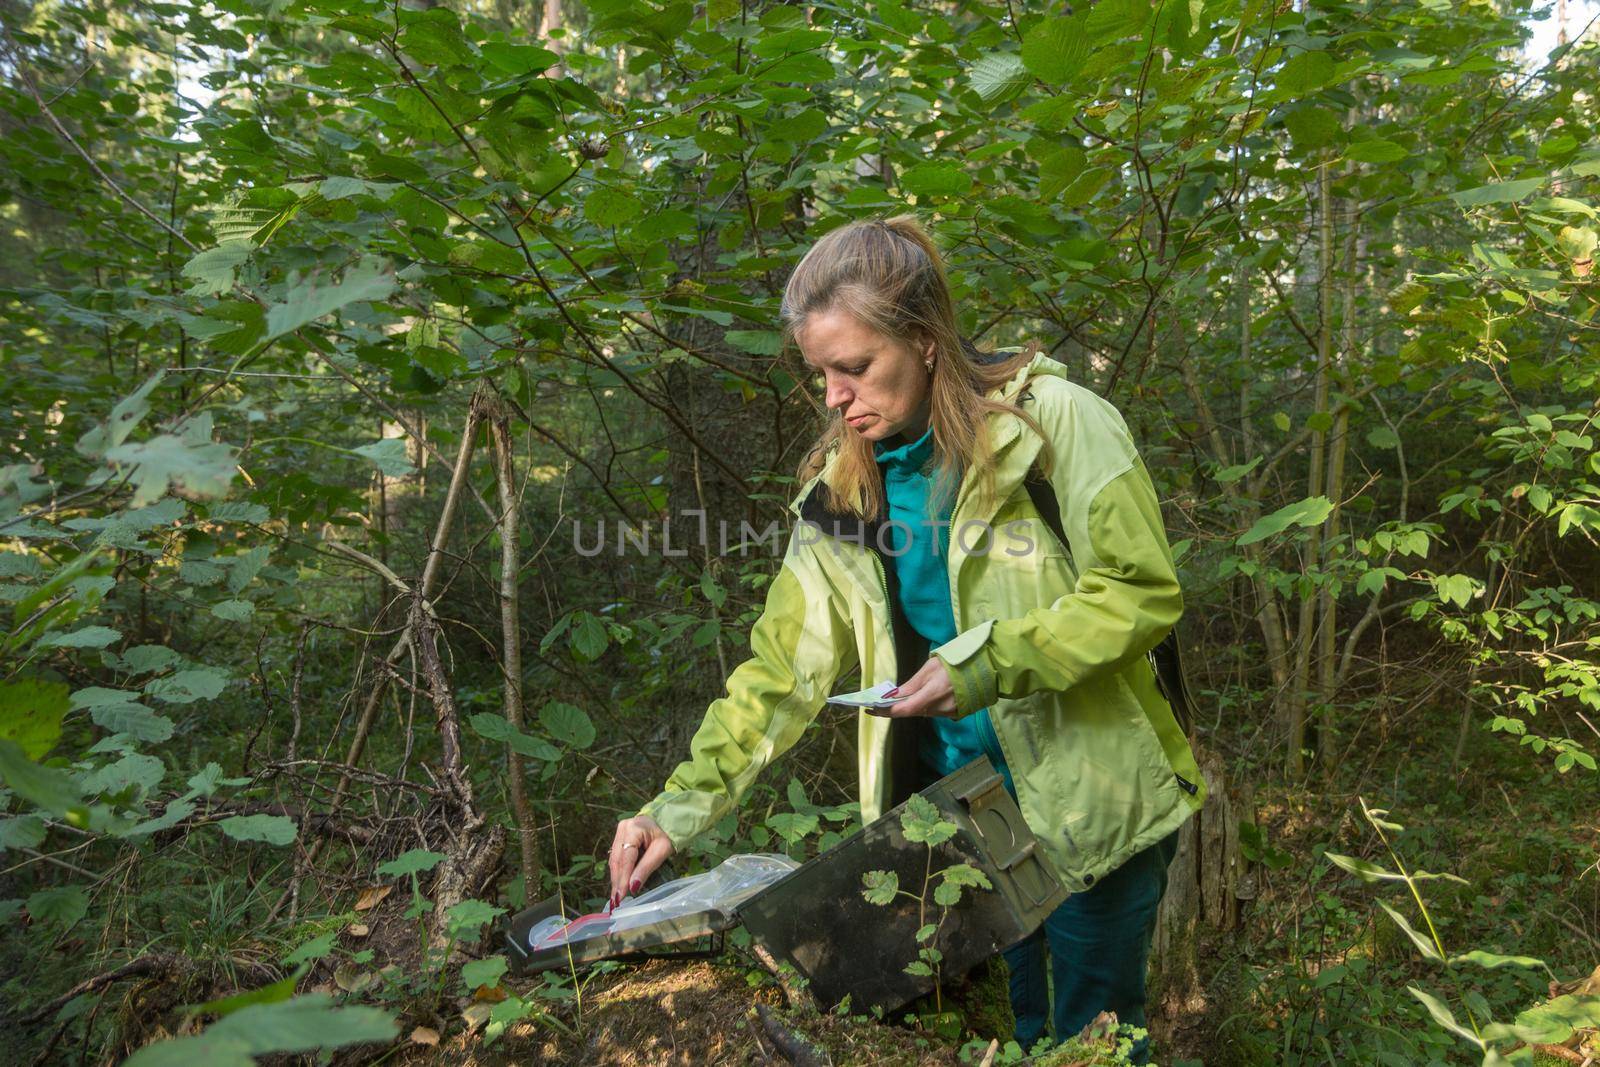 A woman in woods finds a large geocaching container.